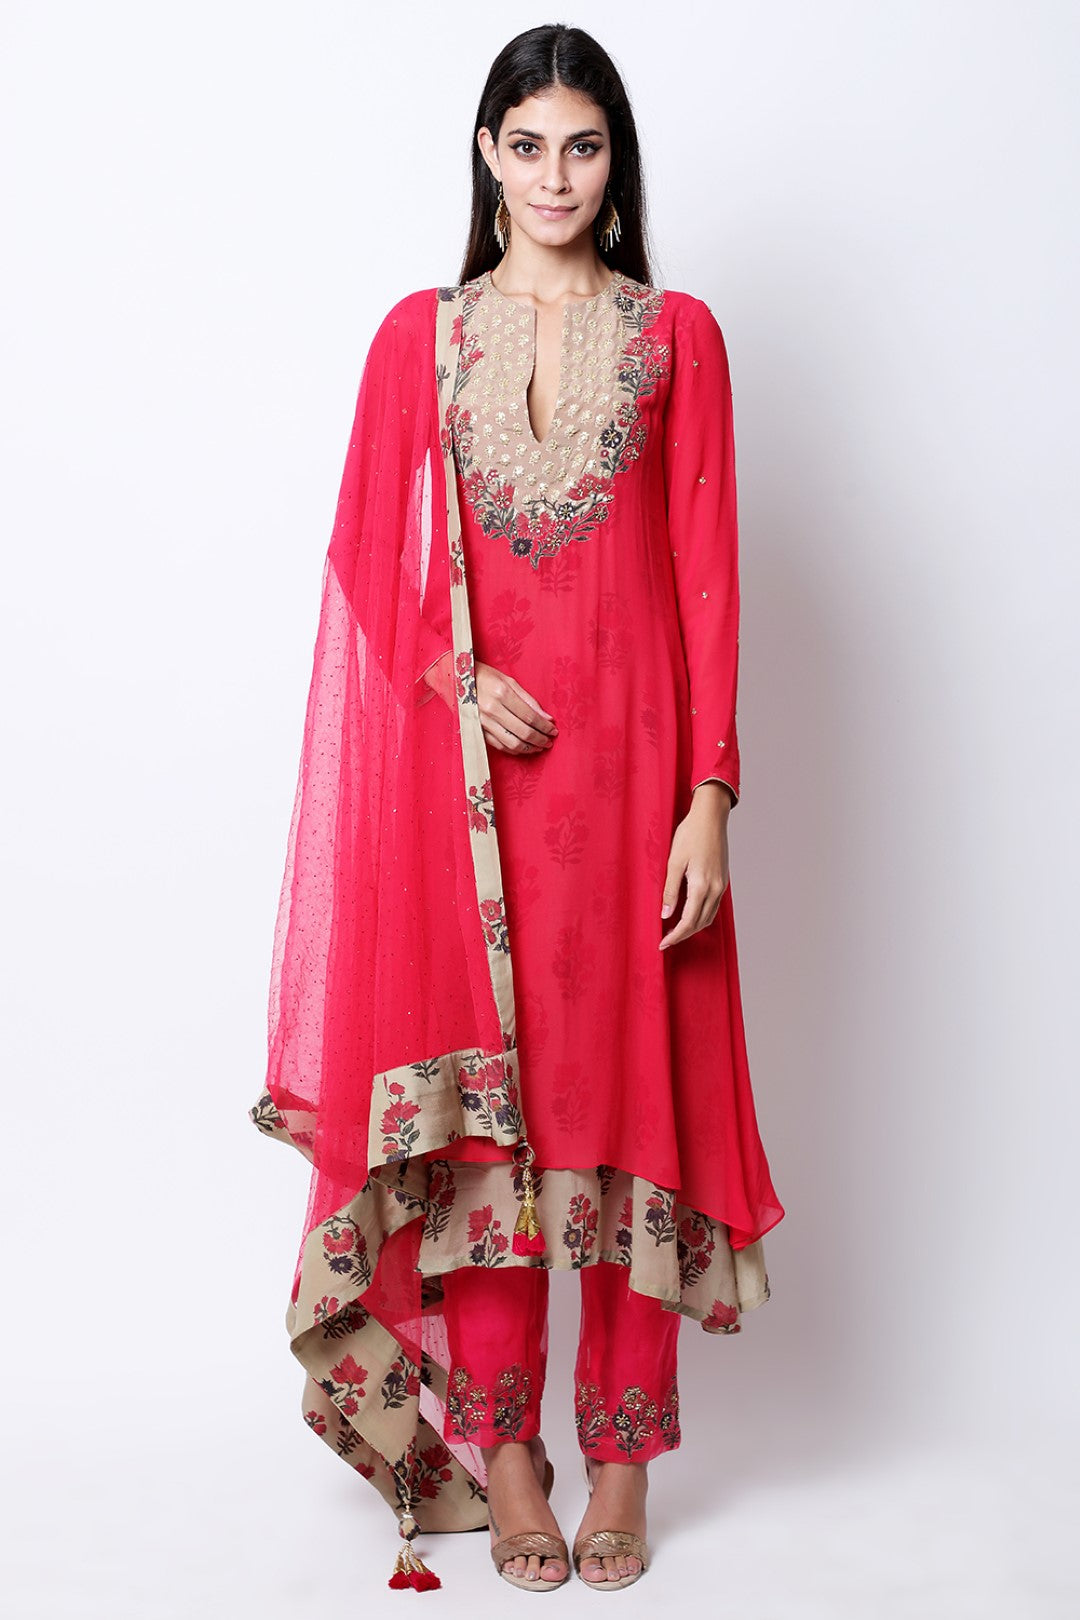 Rose red double layered  asymmetric tunic , paired with mukesh dupatta and pants.